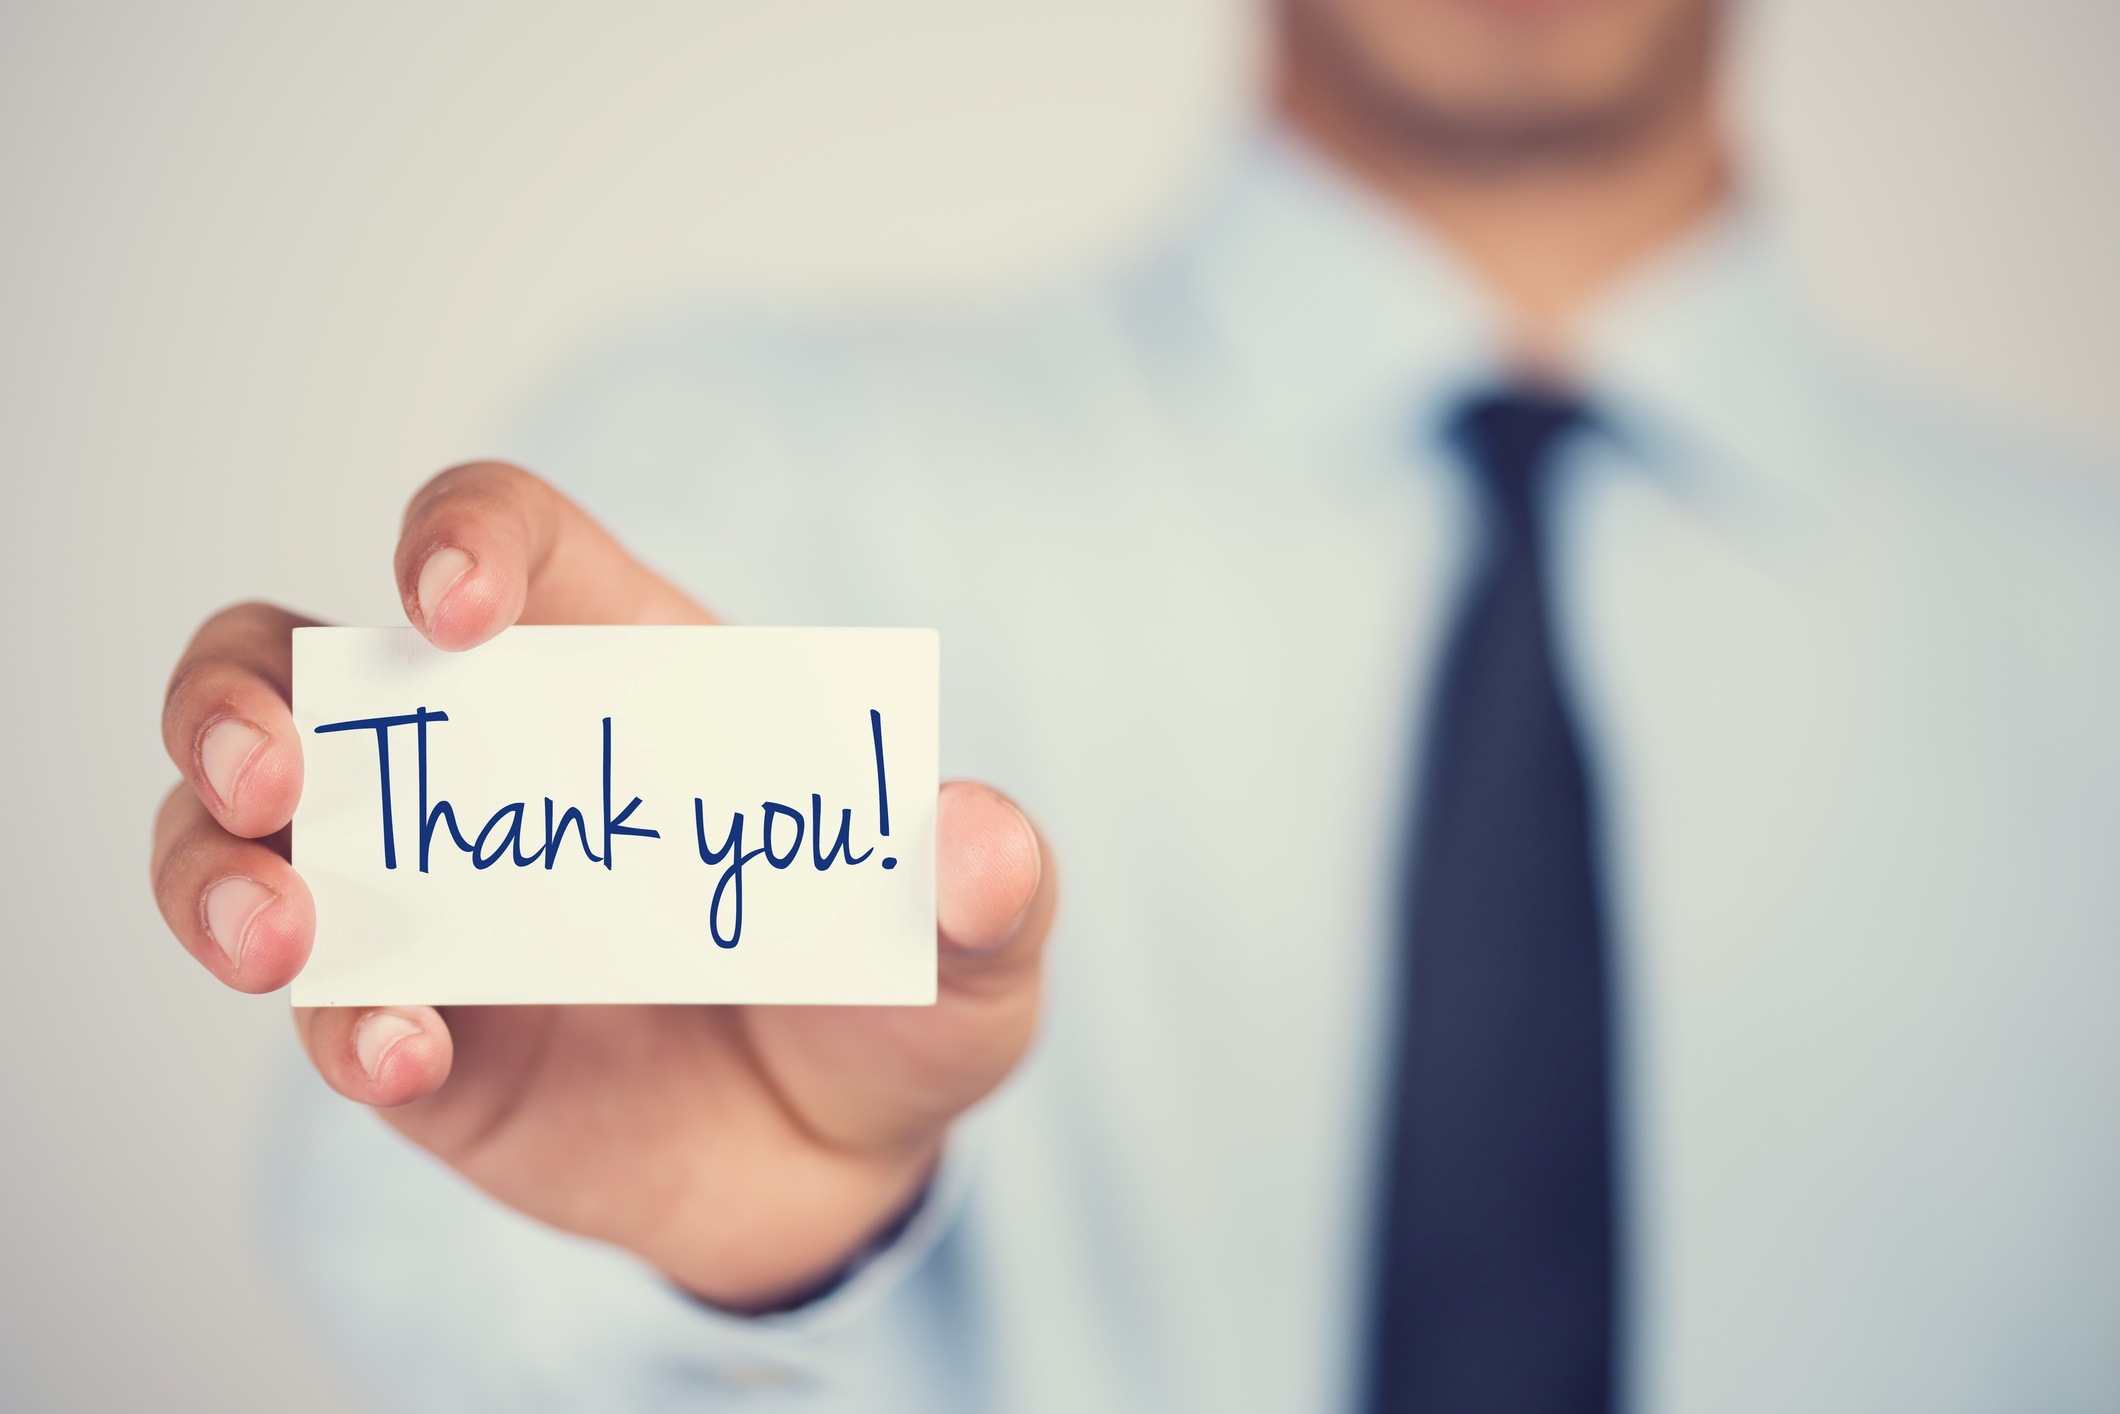 Expressing Gratitude For Your Concern: Thank You!